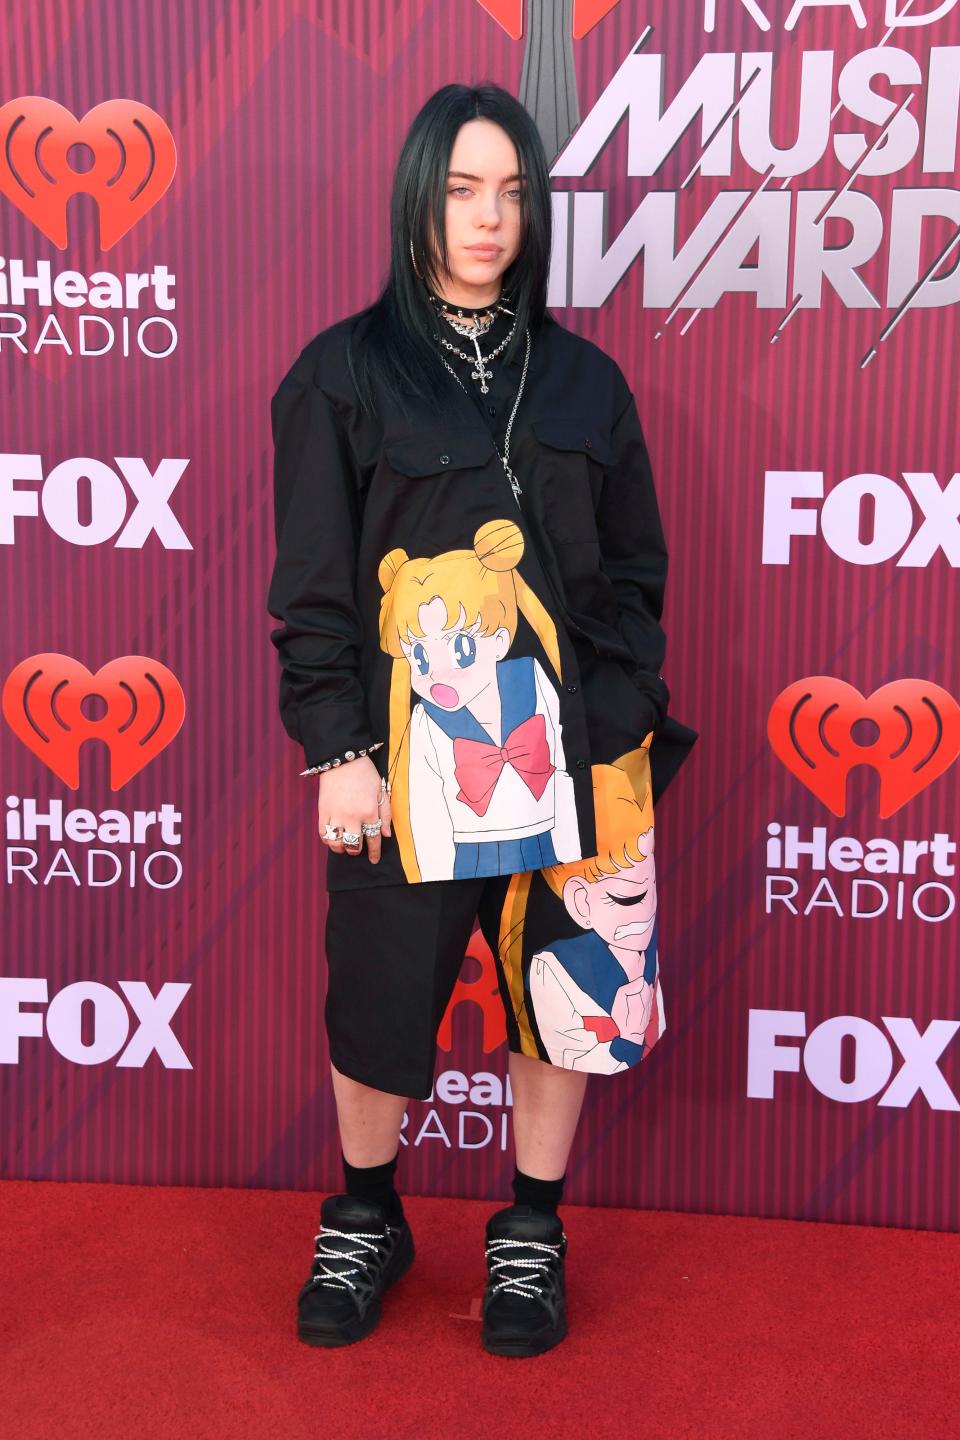 Billie Eilish walks the red carpet in a Sailor Moon-inspired outfit at the iHeartRadio Music Awards in Los Angeles this month.